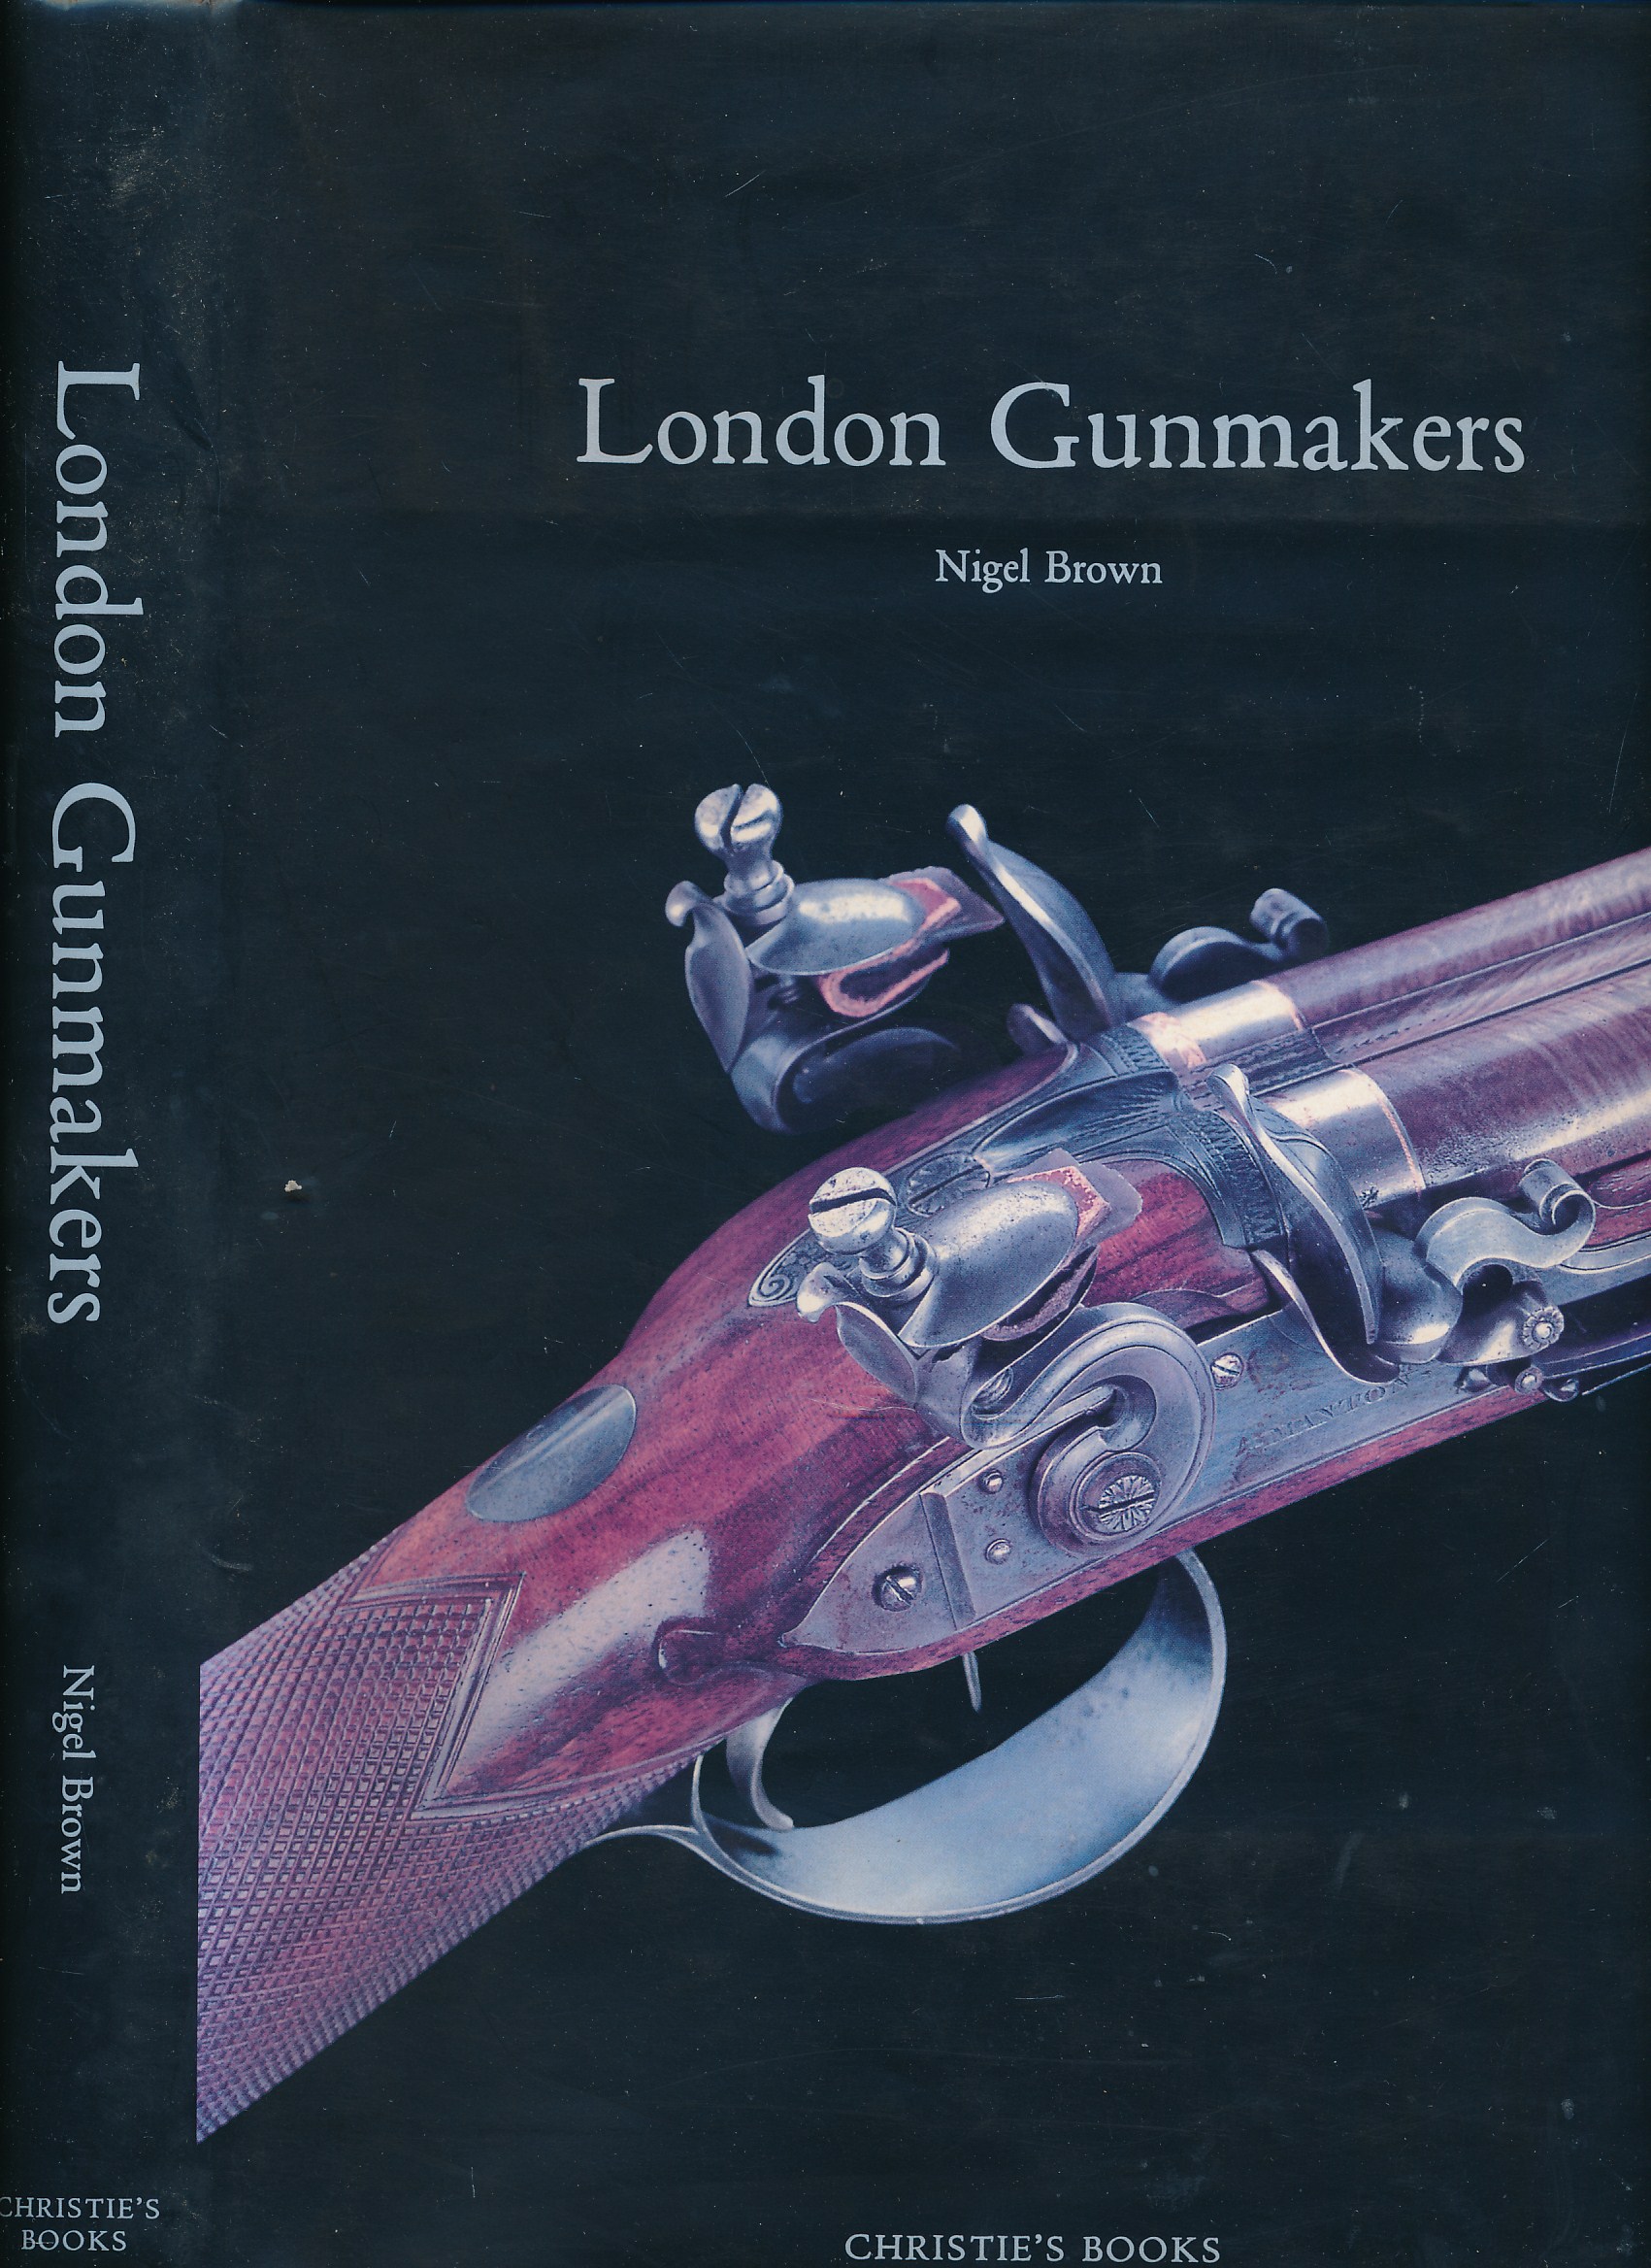 London Gunmakers. Historical Data on the London Gun Trade in the Nineteenth and Twentieth Centuries. Signed copy.